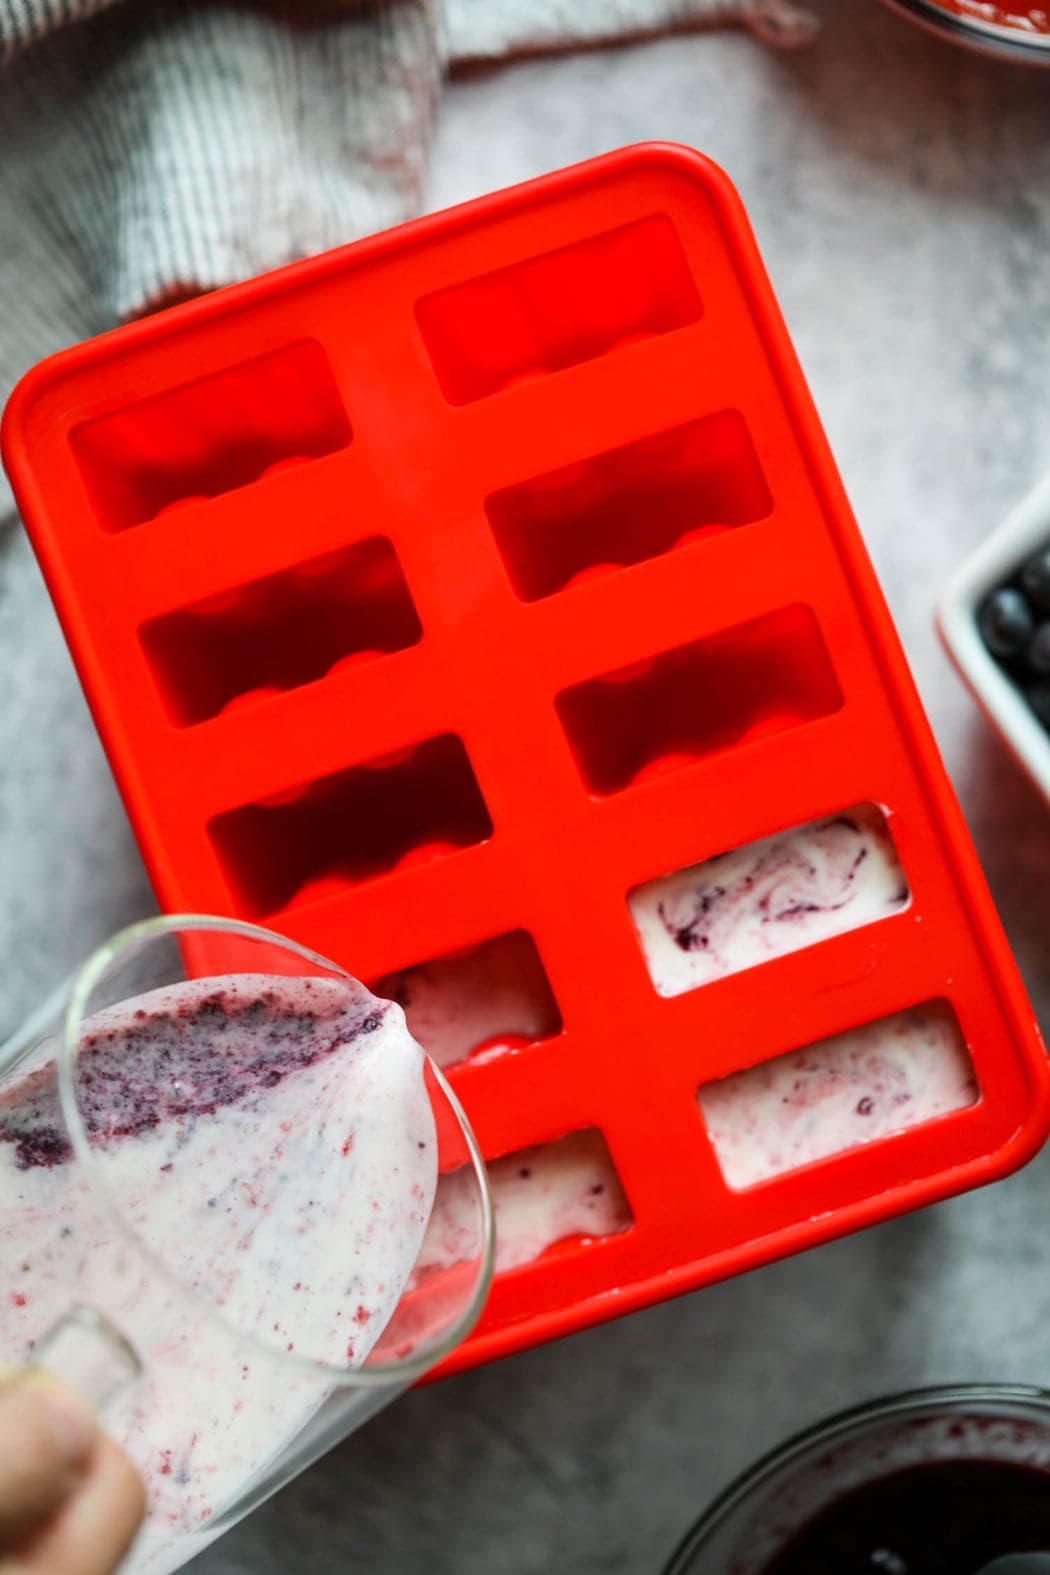 The mixture for homemade yogurt popsicles being poured into a popsicle mold